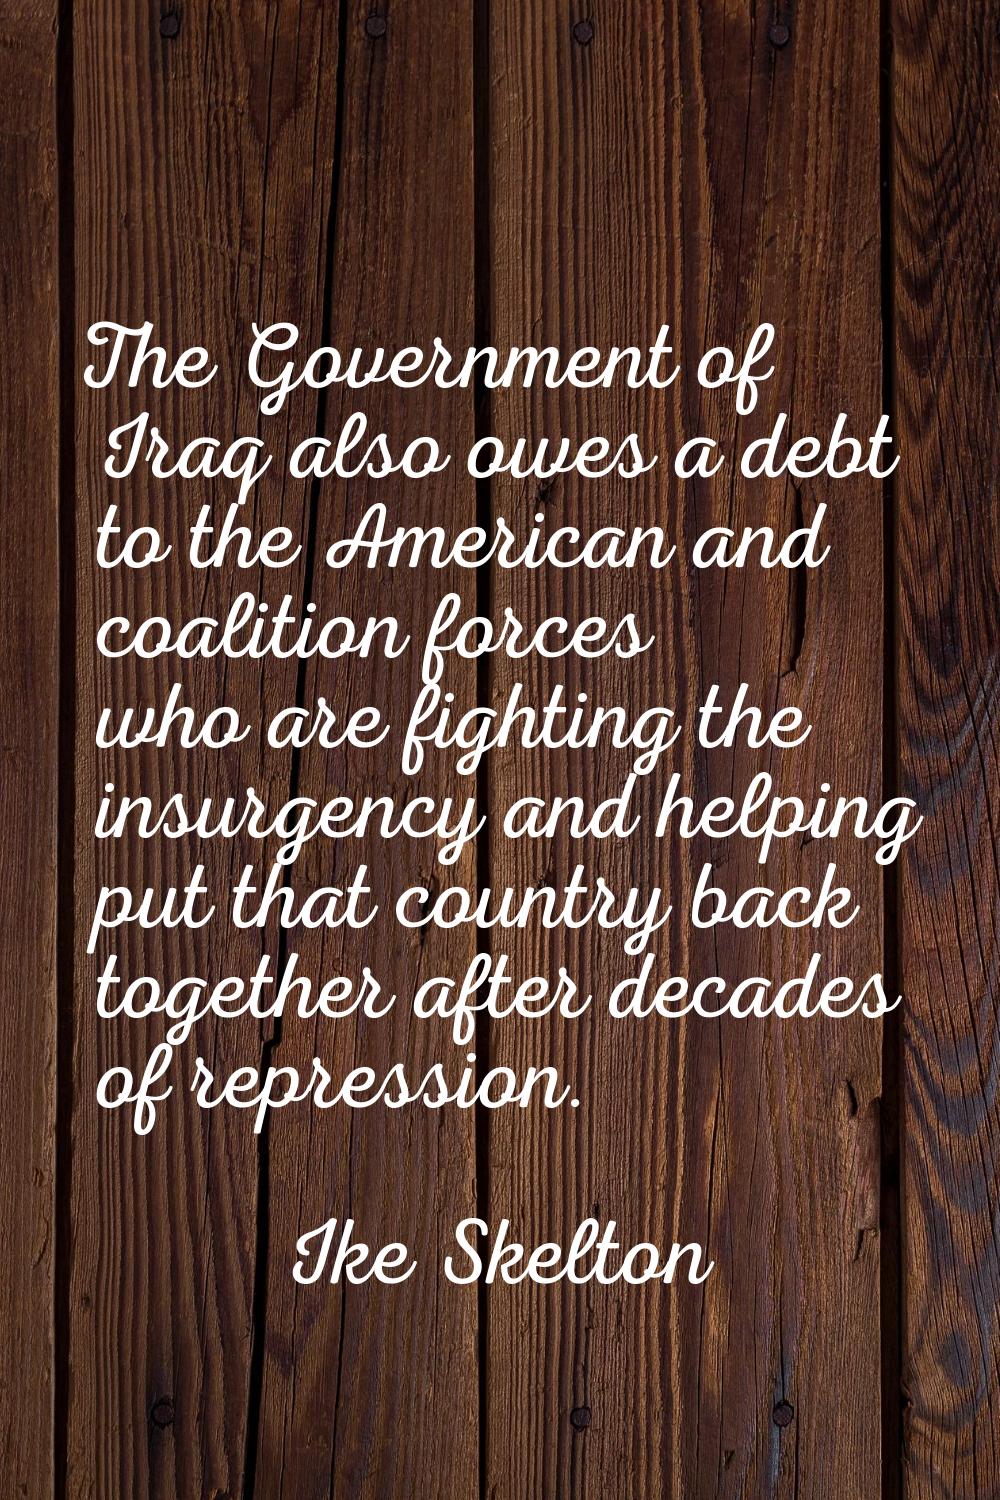 The Government of Iraq also owes a debt to the American and coalition forces who are fighting the i